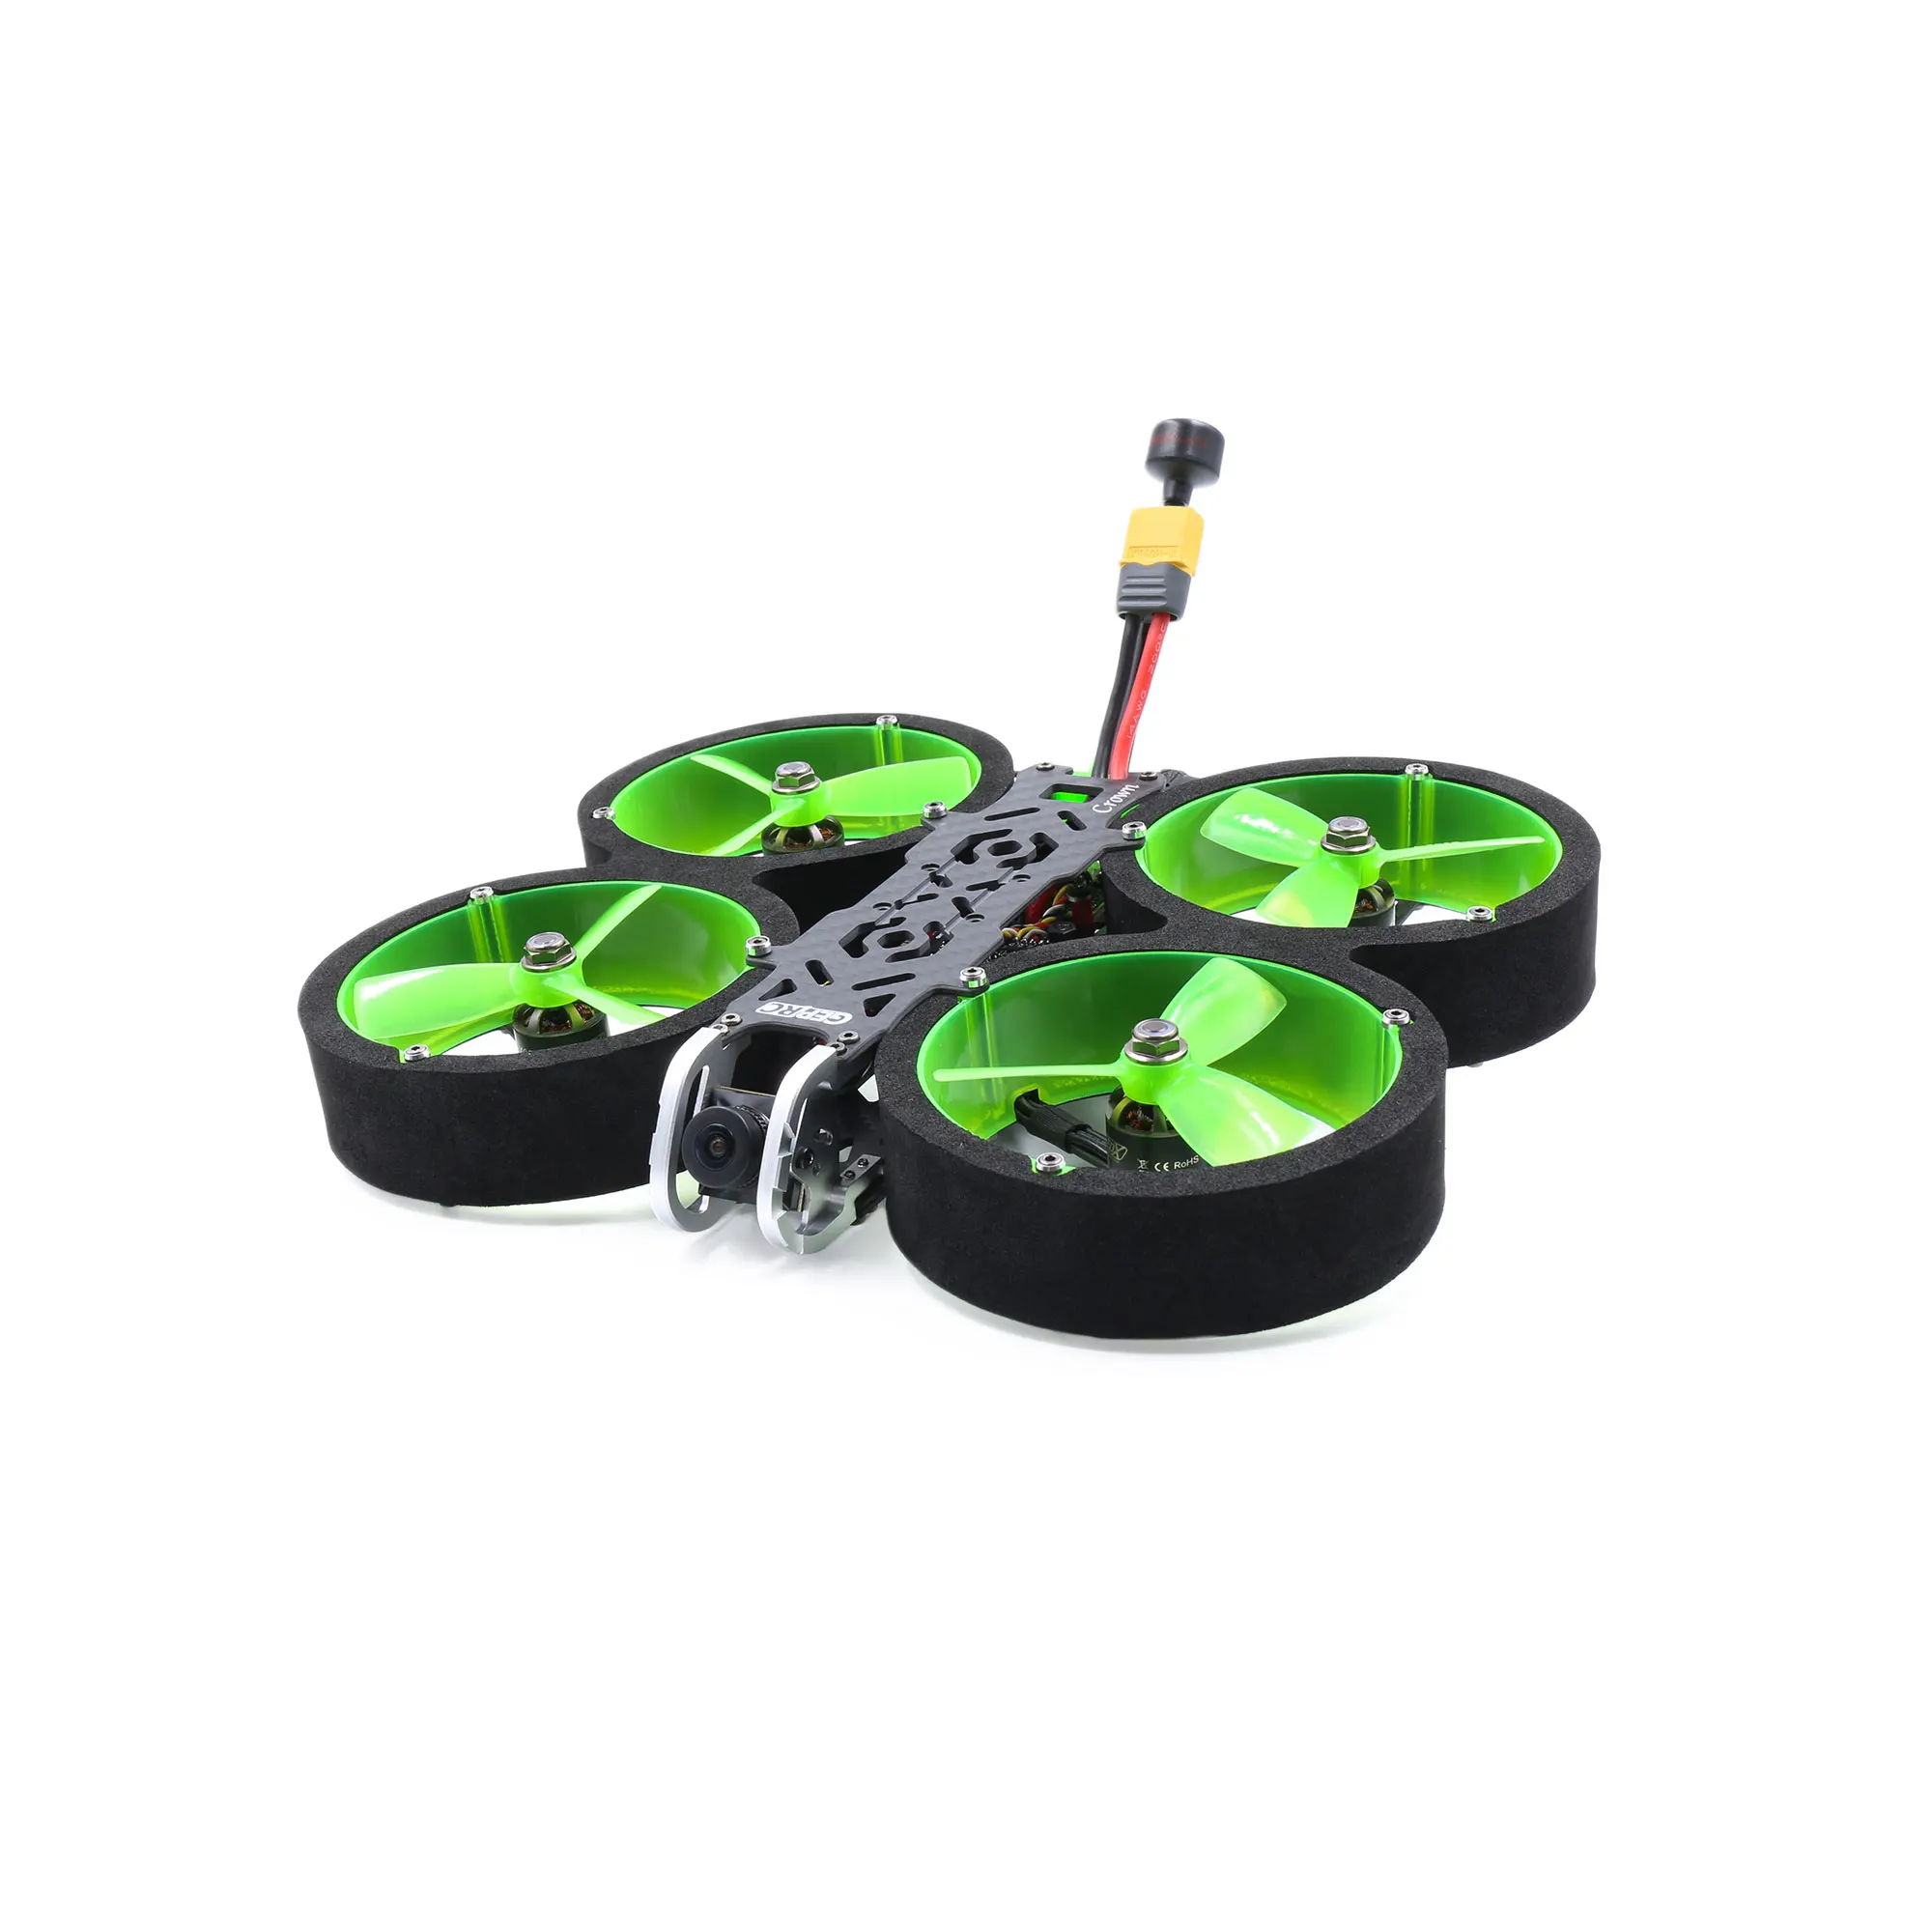 

GEPRC Crown Analog SPAN F722 HD 45A 600mW Caddx Ratel V2 1408 3500KV 4S 2500KV 6S 156mm 3inch FPV Cinewhoop Ducted Drone